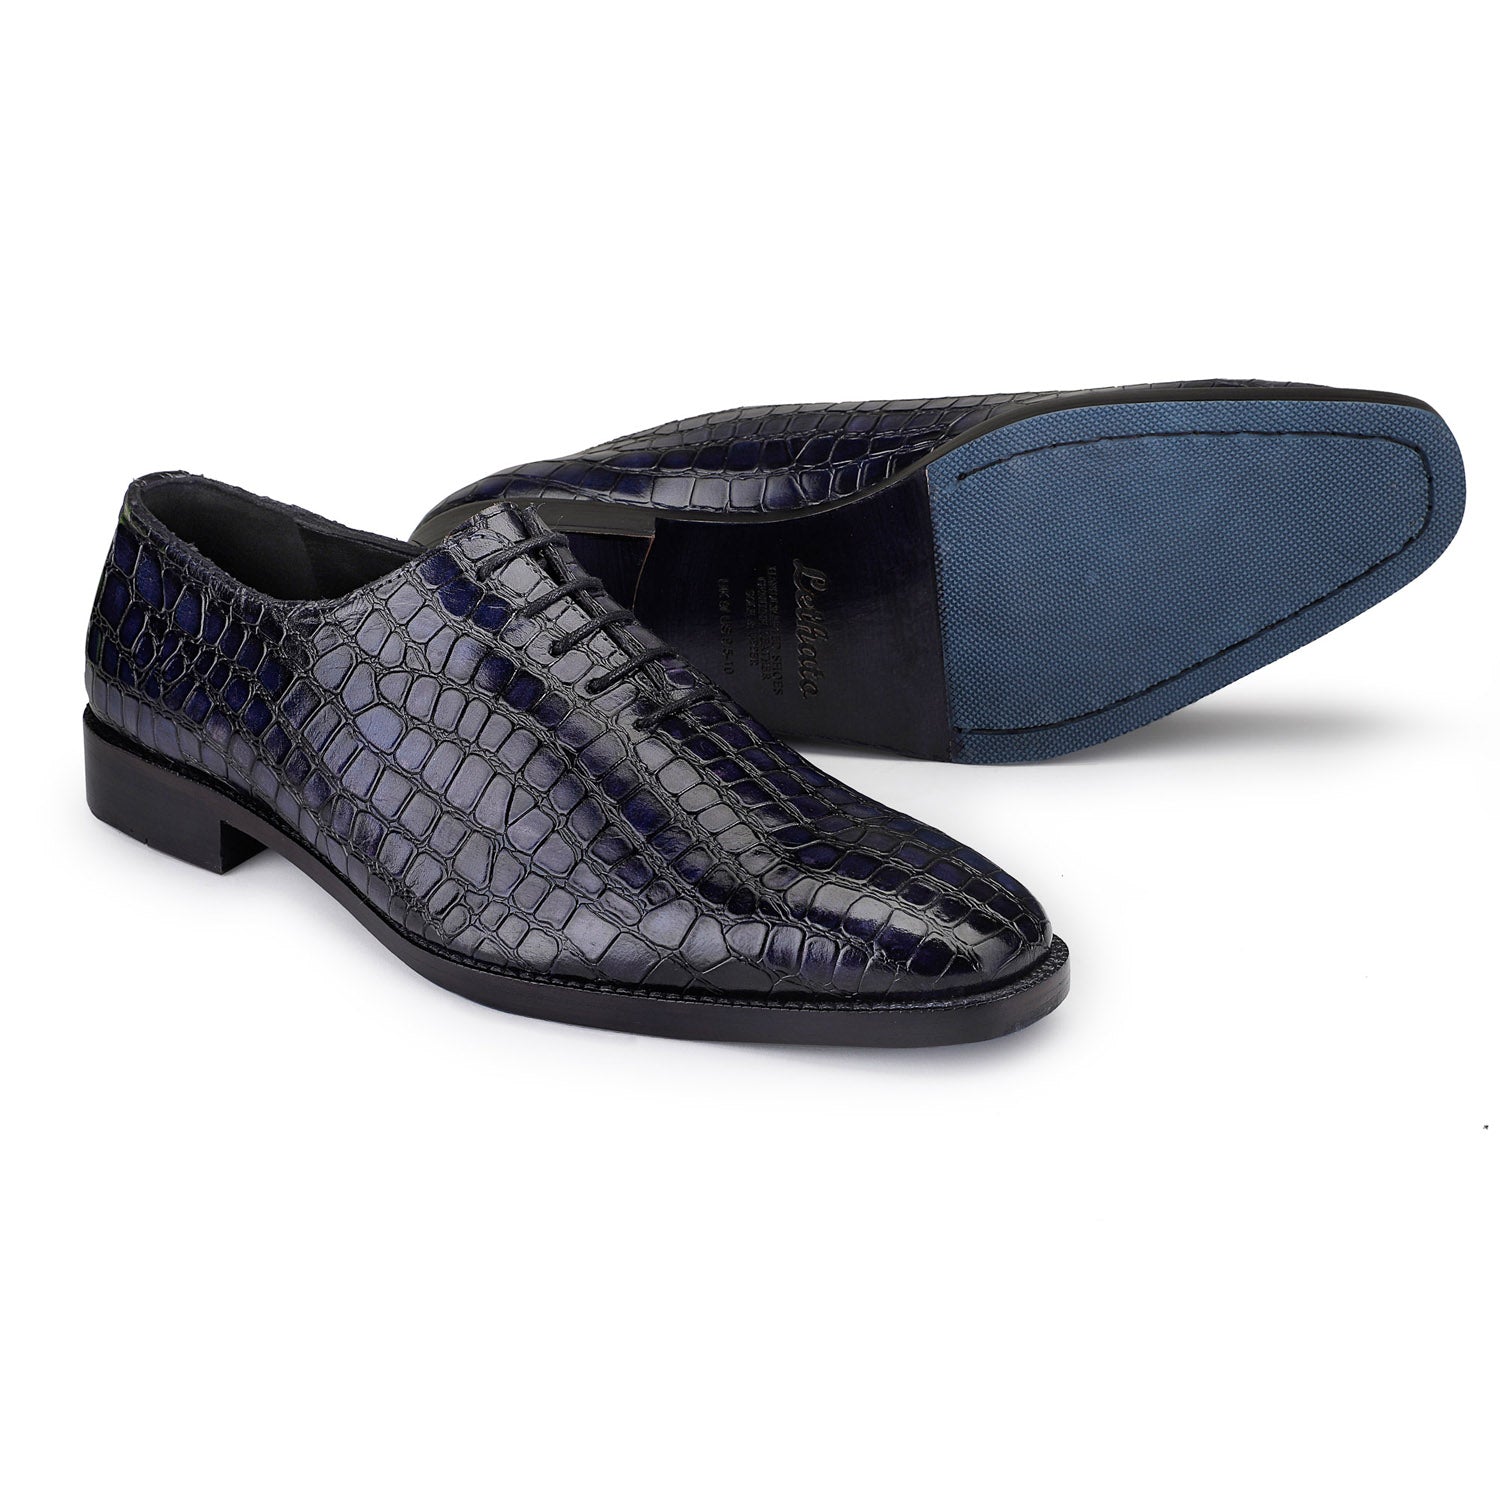 Lethato - Men's Italian Leather Dress Shoes | Made to Order Shoes